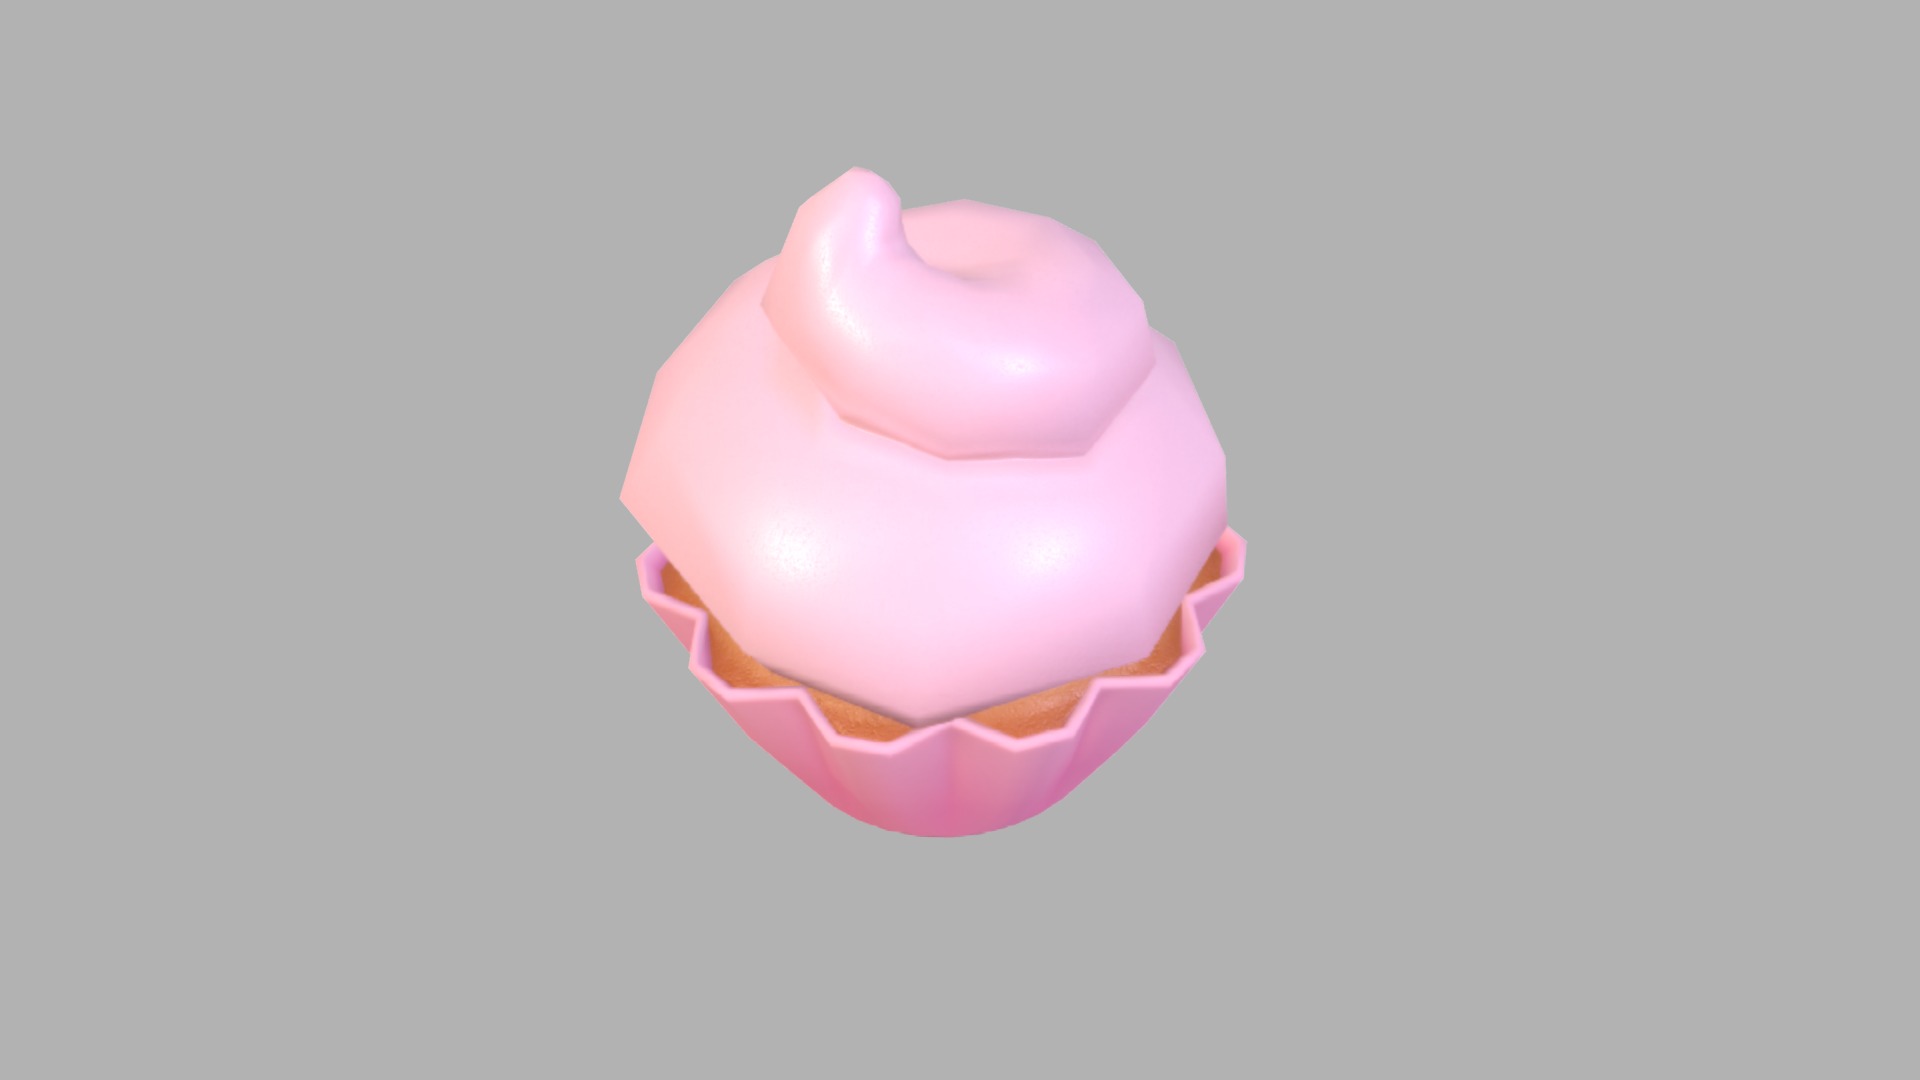 3D model Cupcake - This is a 3D model of the Cupcake. The 3D model is about a pink object with a white background.